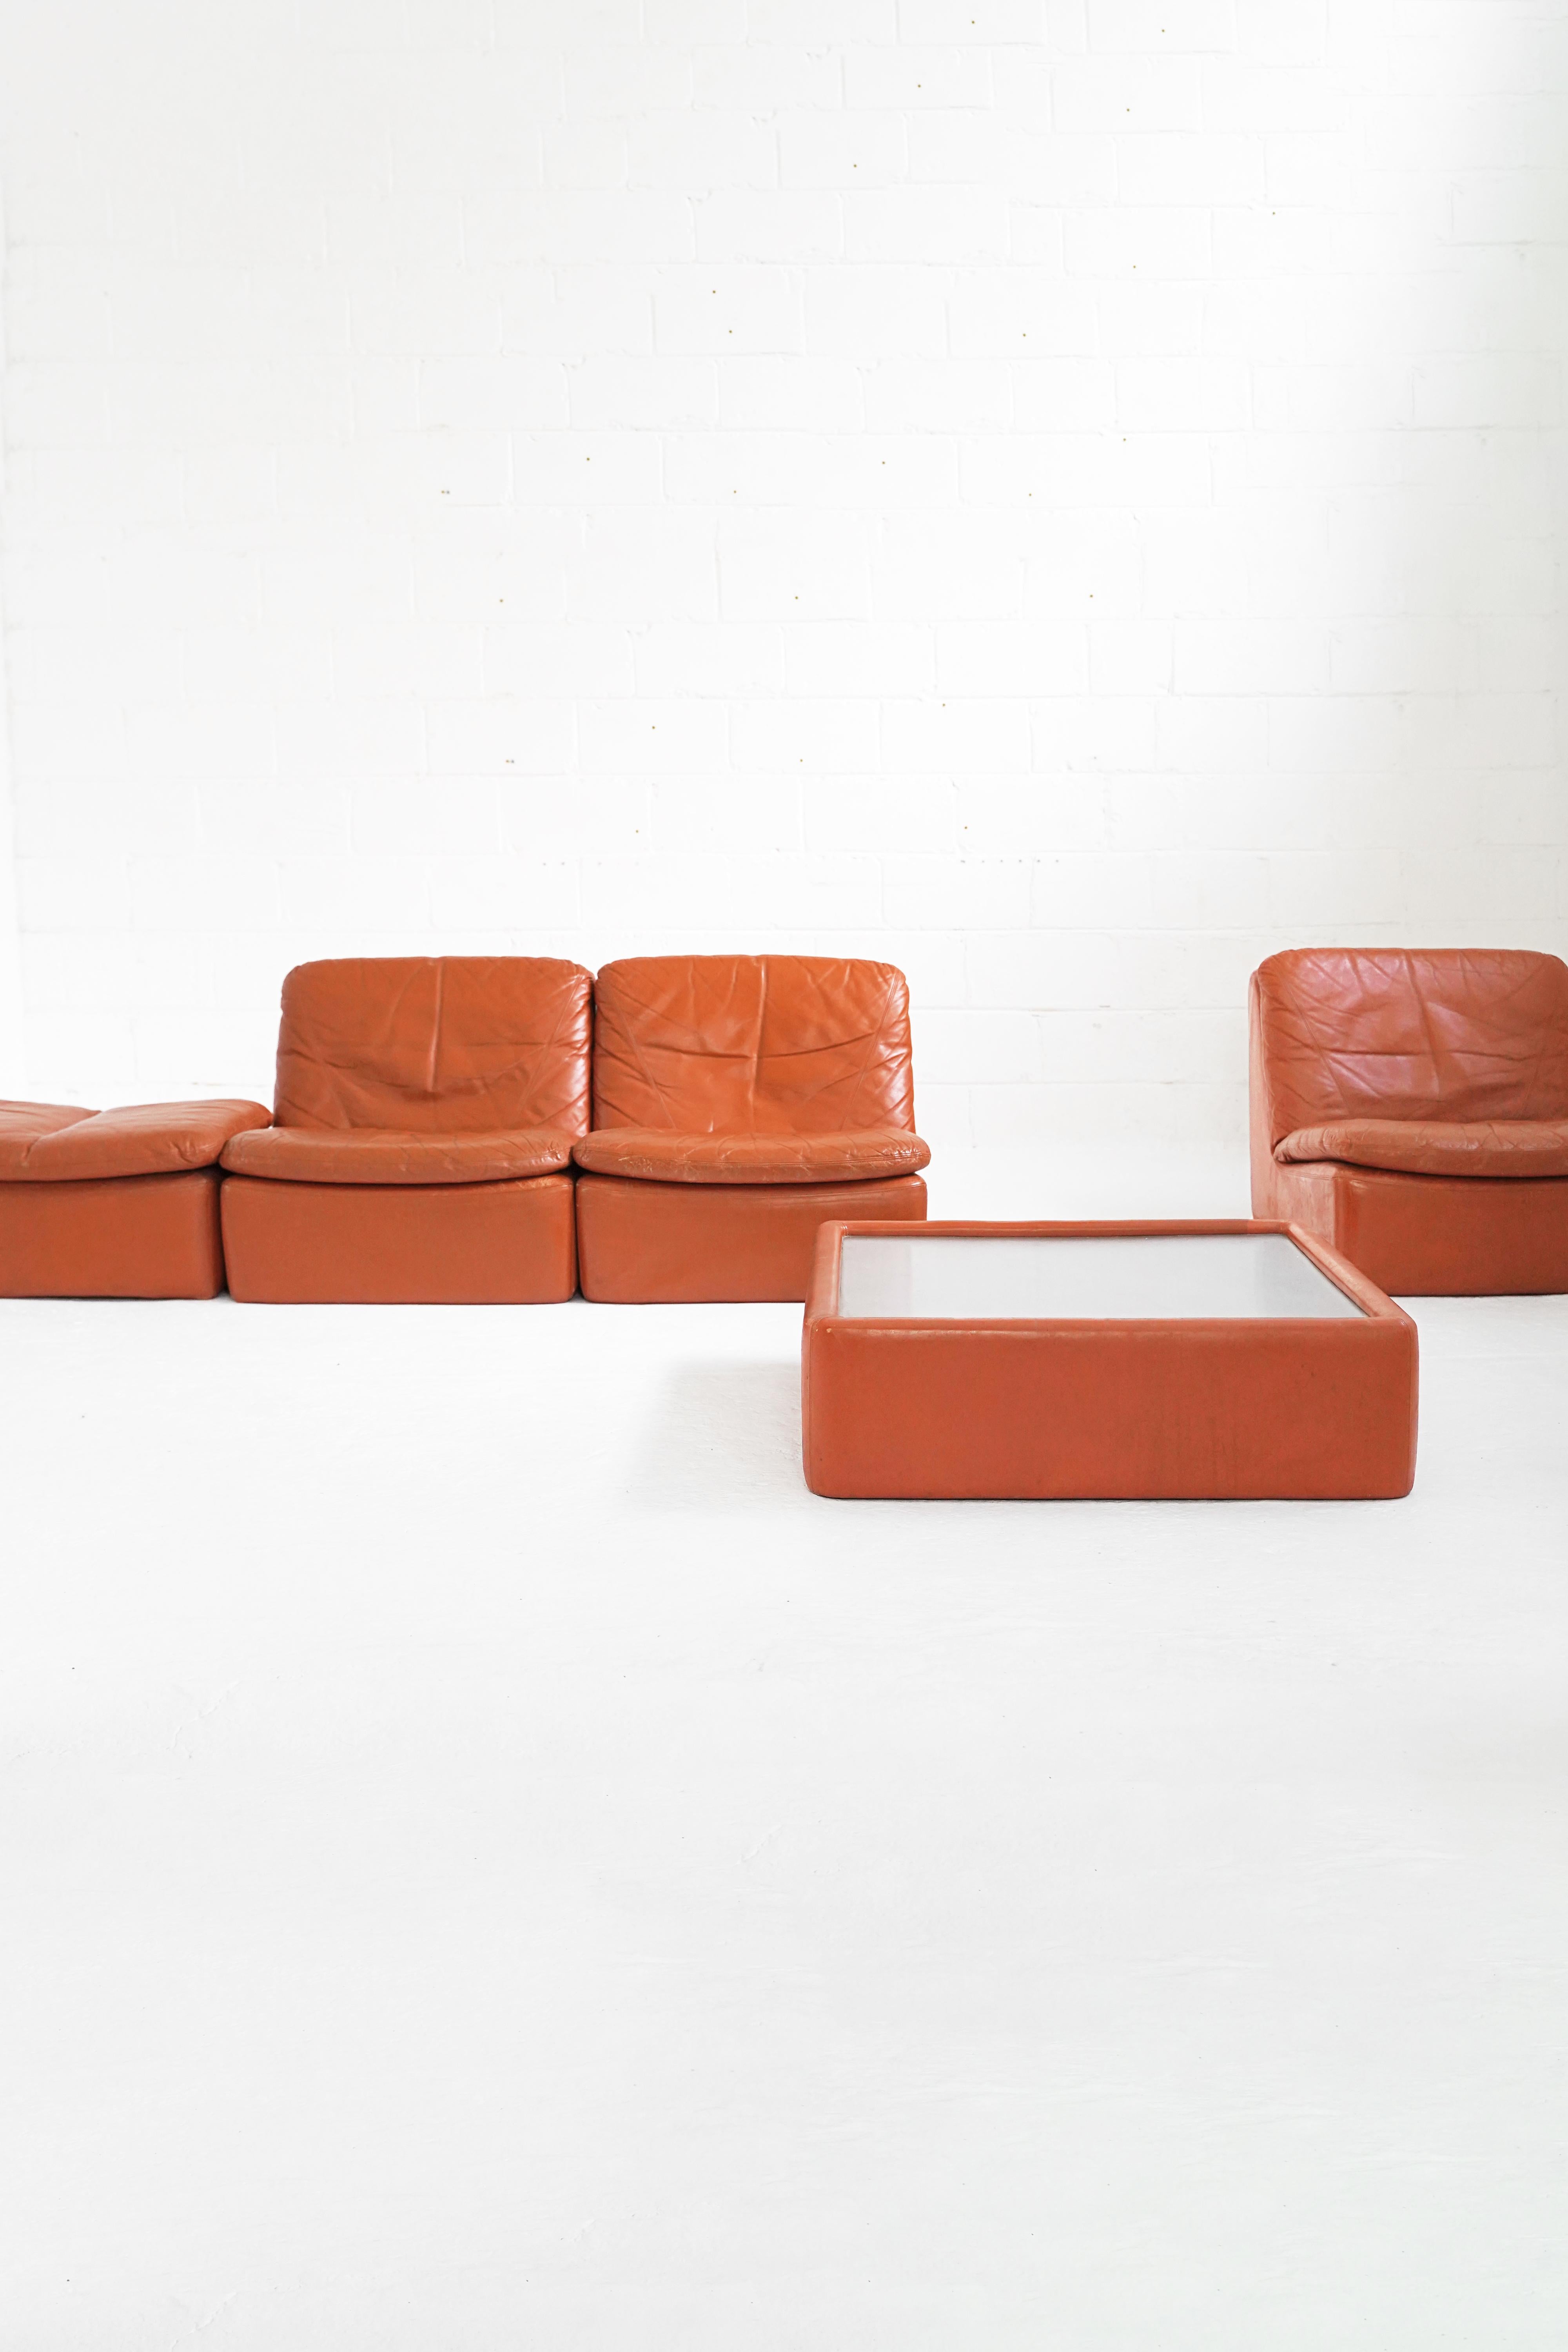 Vintage Modular Leather Sectional Sofa and Coffee Table C300 by Interna Design 4